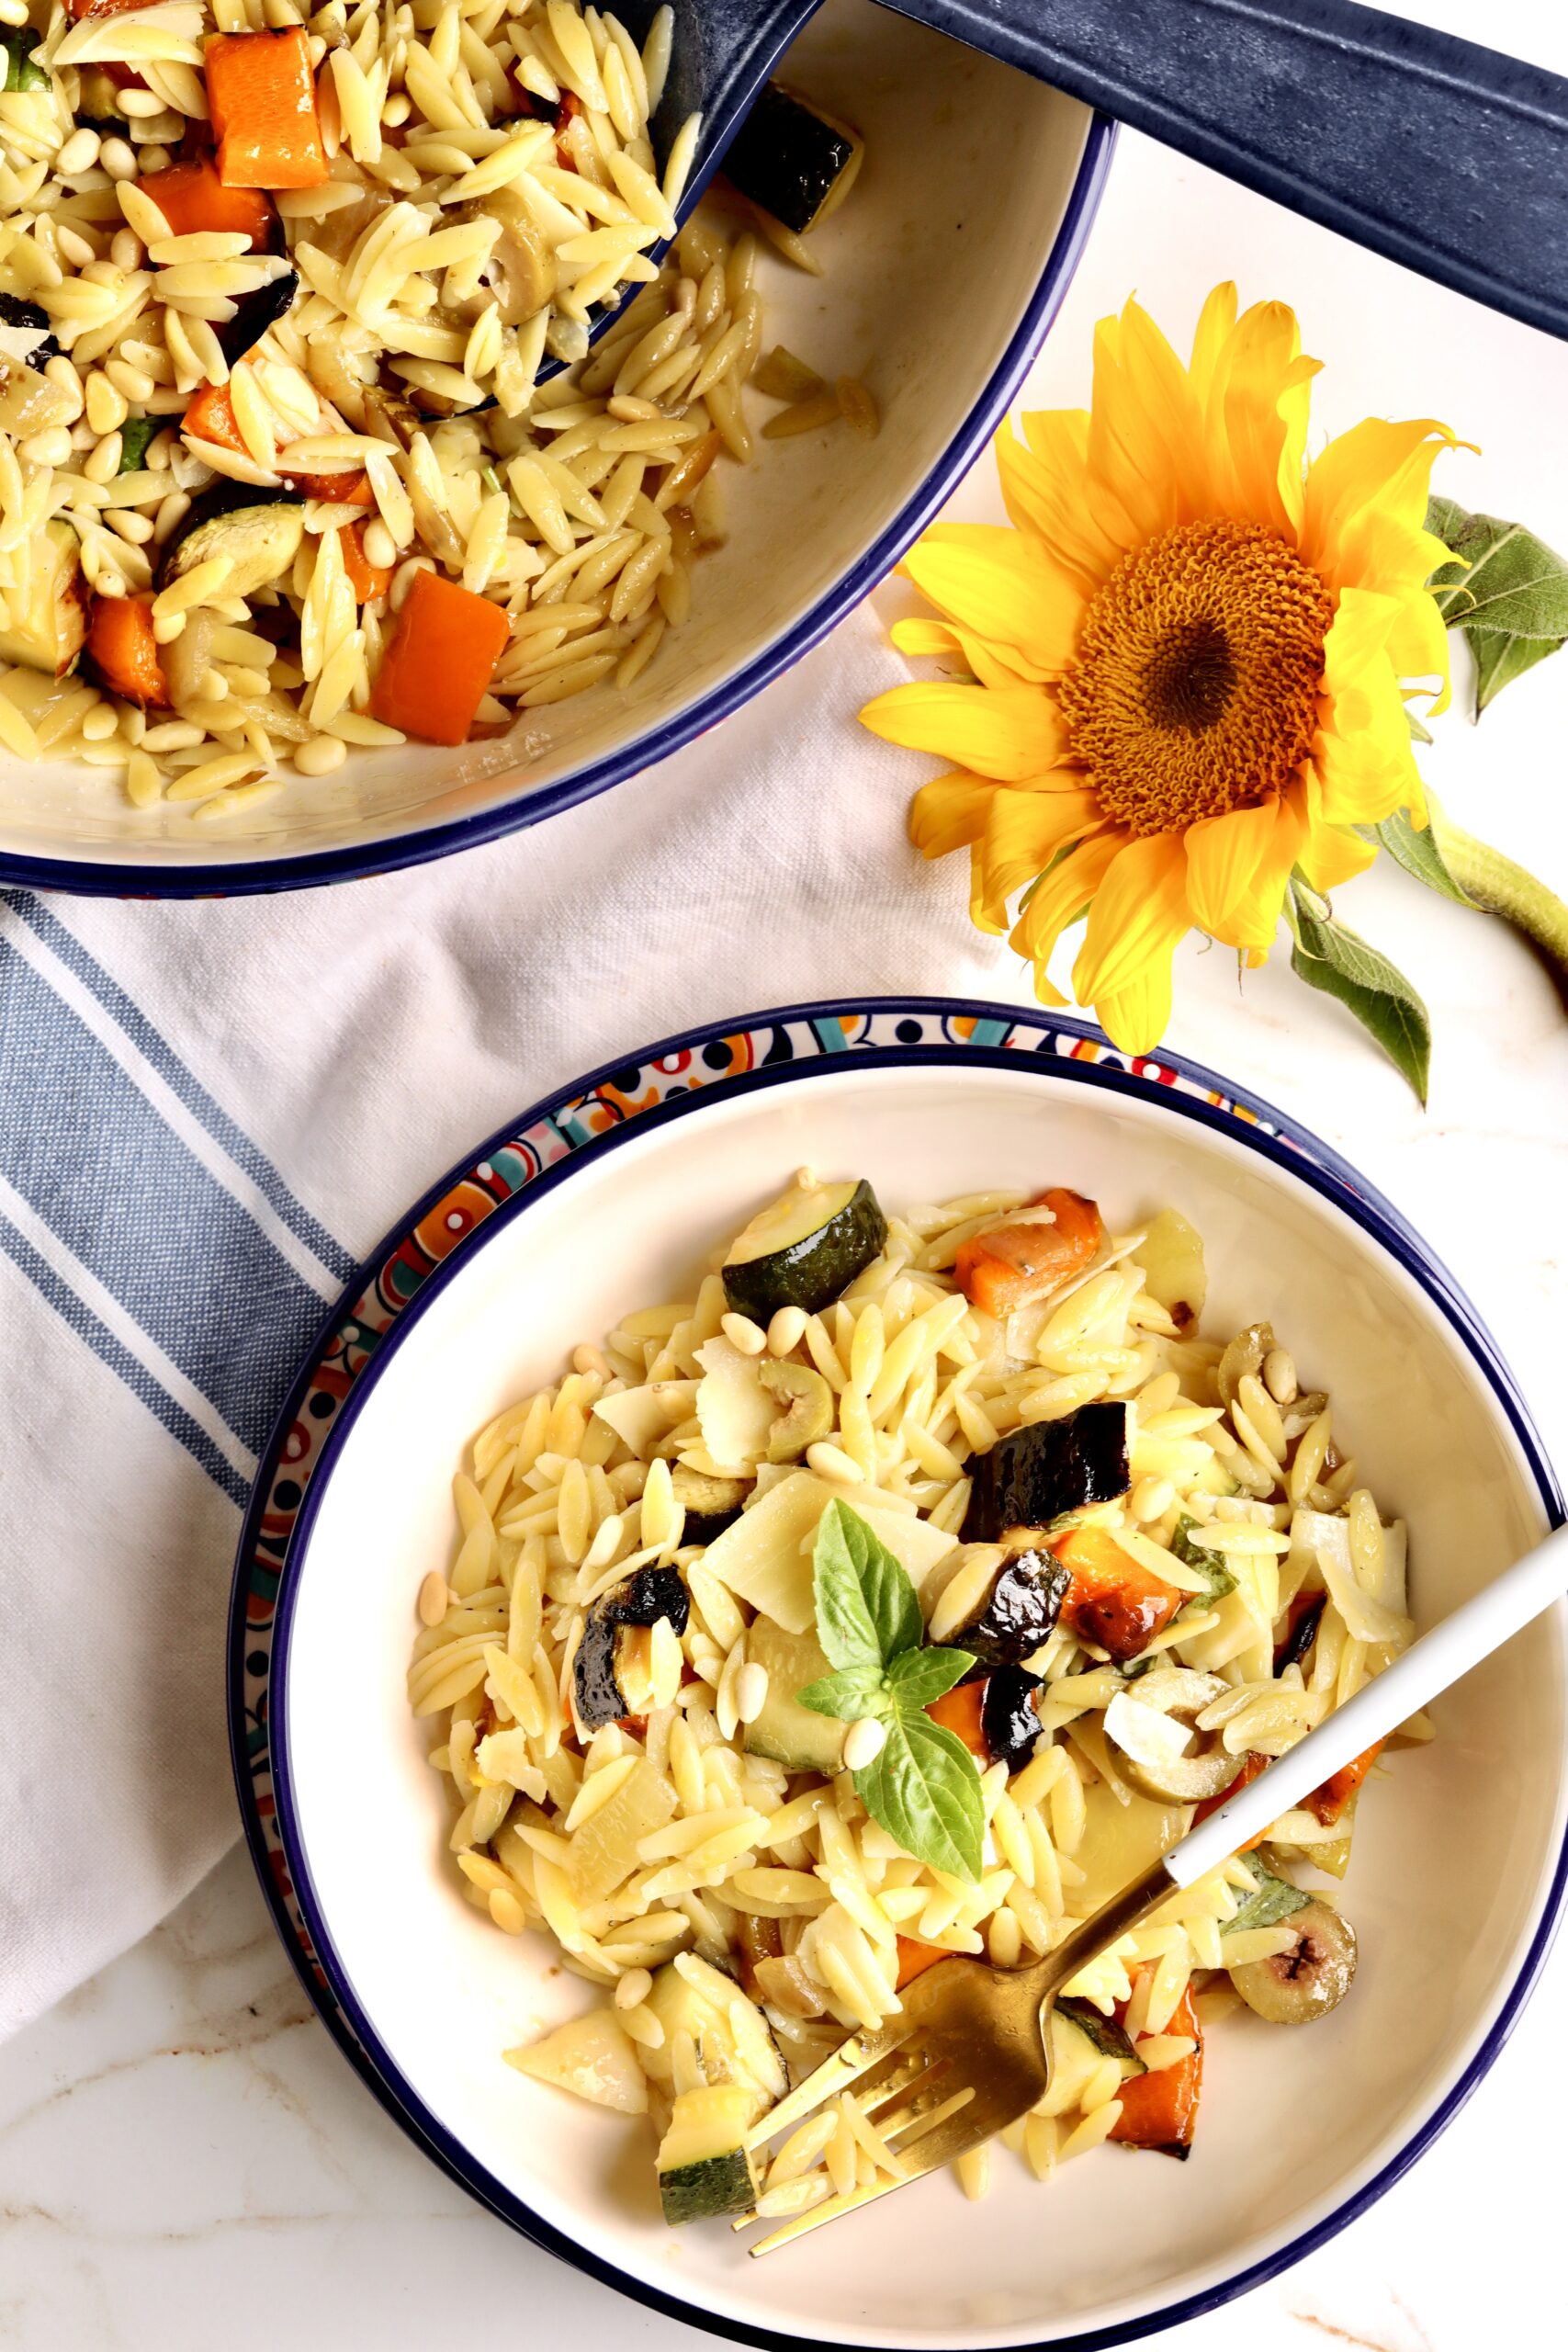 Orzo Risotto - The Almond Eater